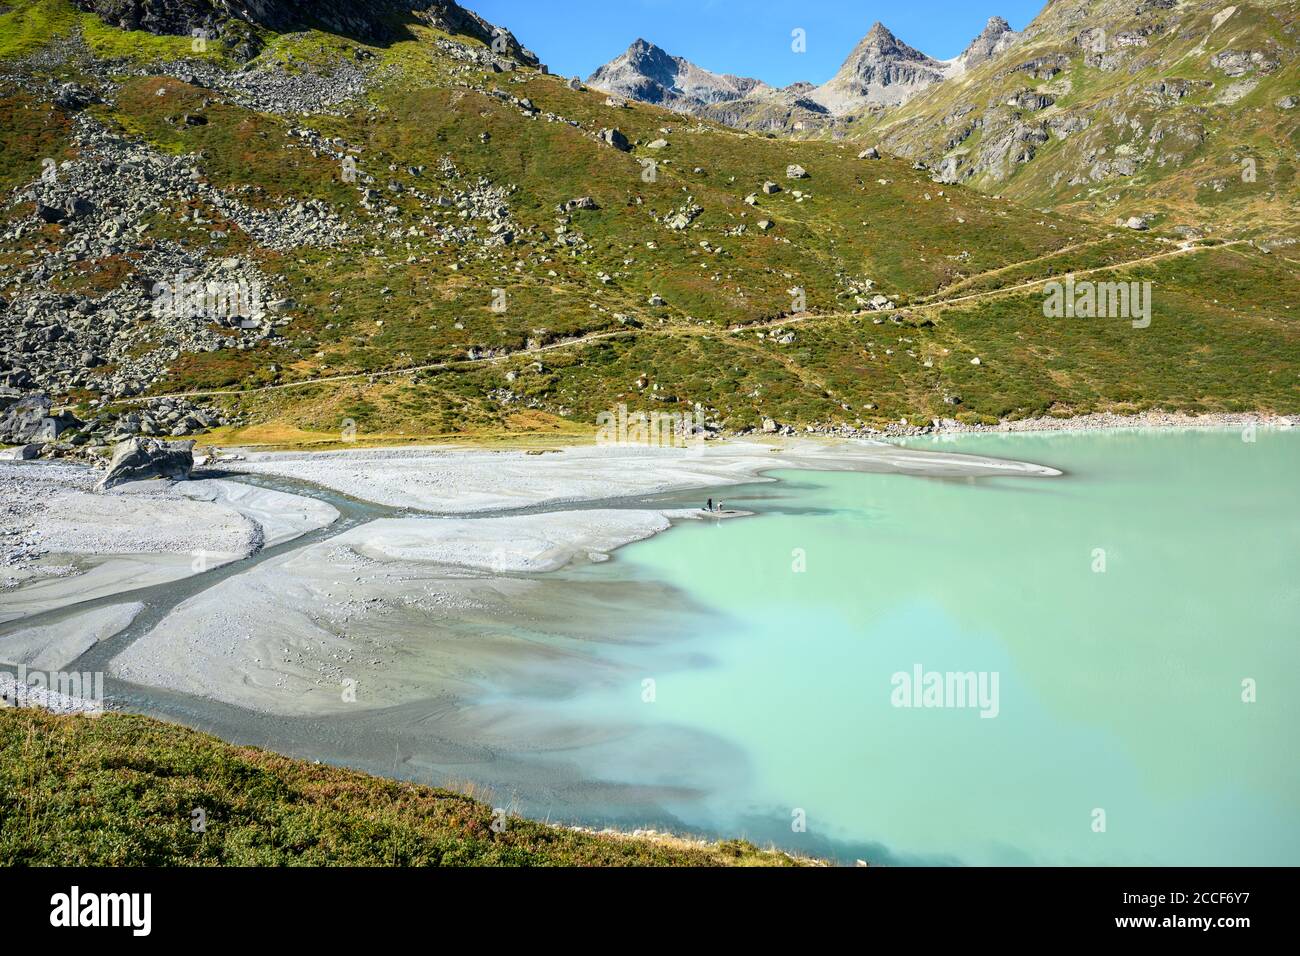 Austria, Montafon, the Ill flows into the Silvrettasee at the southern end. Stock Photo